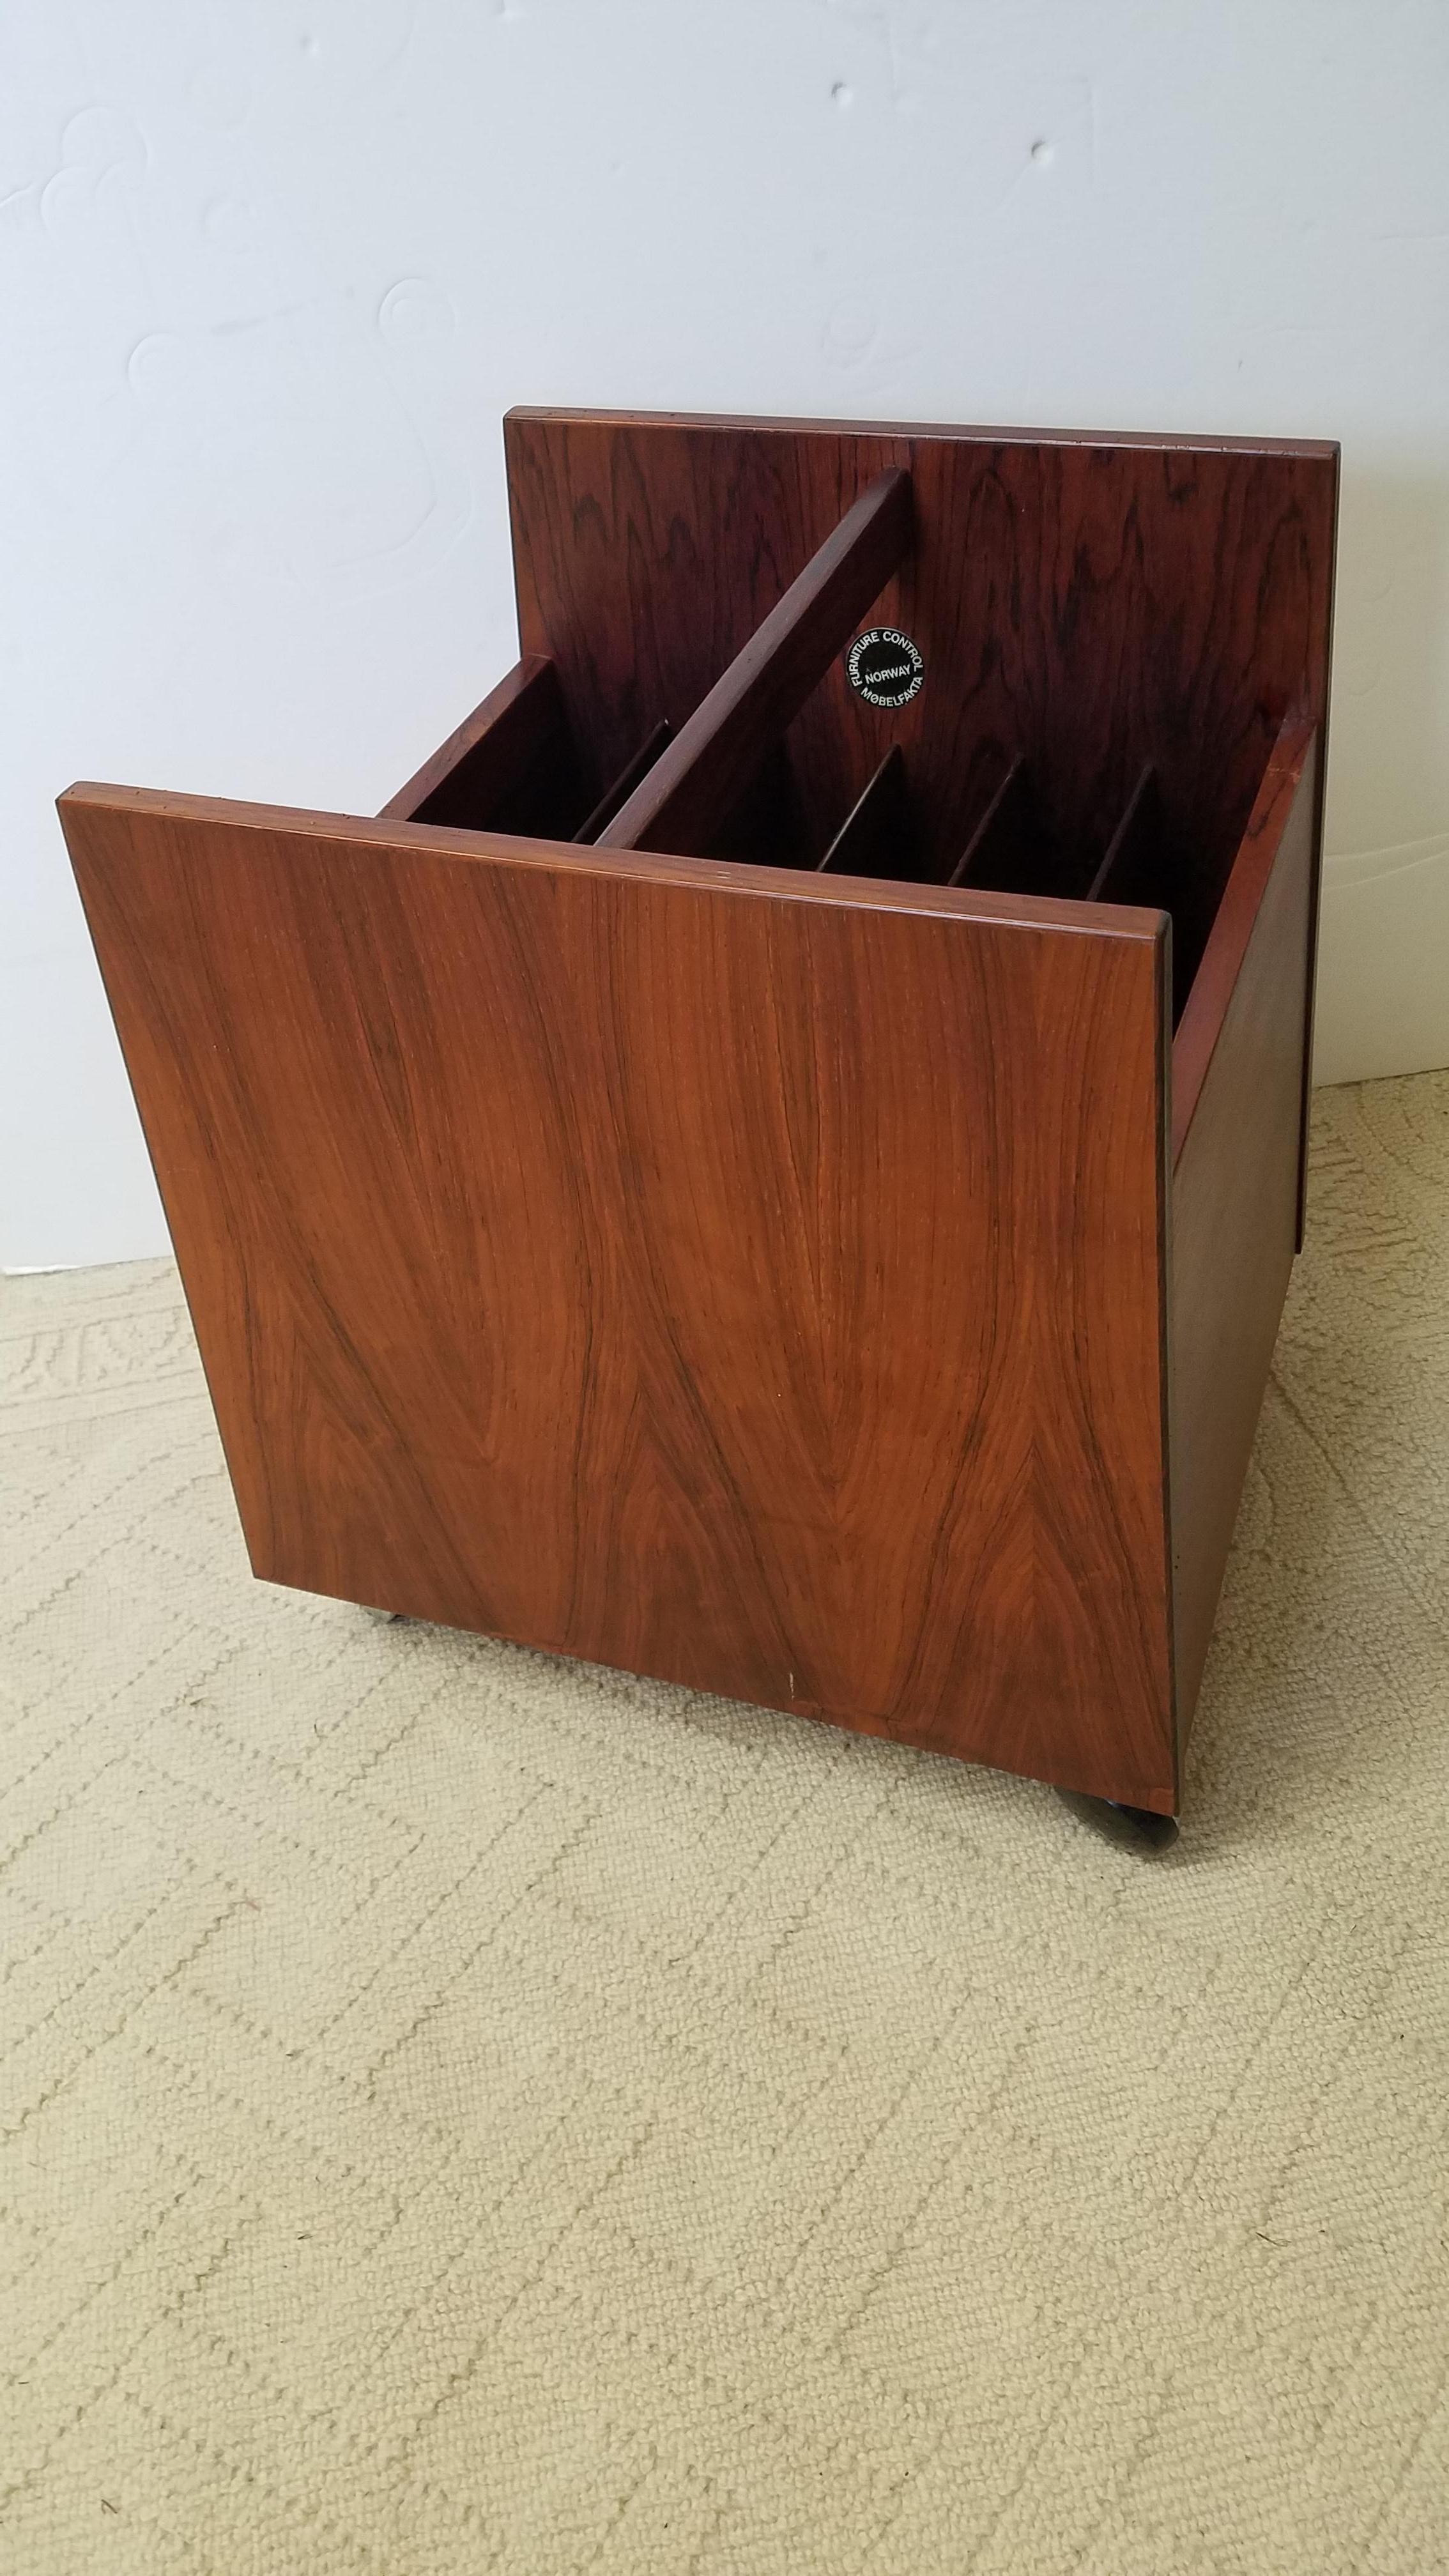 Midcentury Scandinavian rosewood magazine stand in excellent original condition. The body with 6 compartments with castors for easy movement... The wood having beautifully figured grain. Great as an LP holder of music stand.